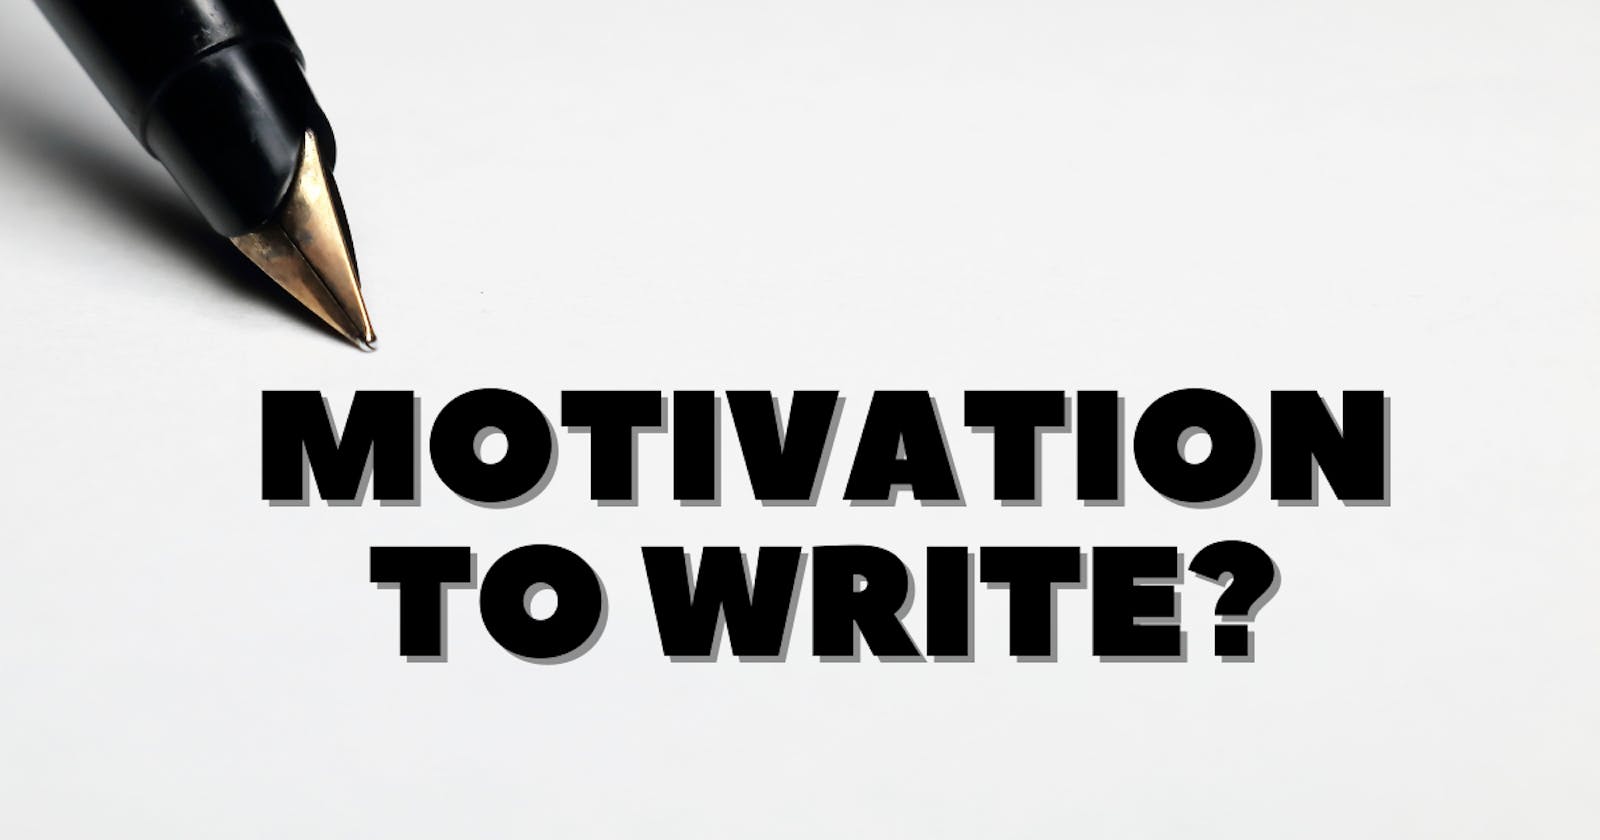 What's my motivation to write?